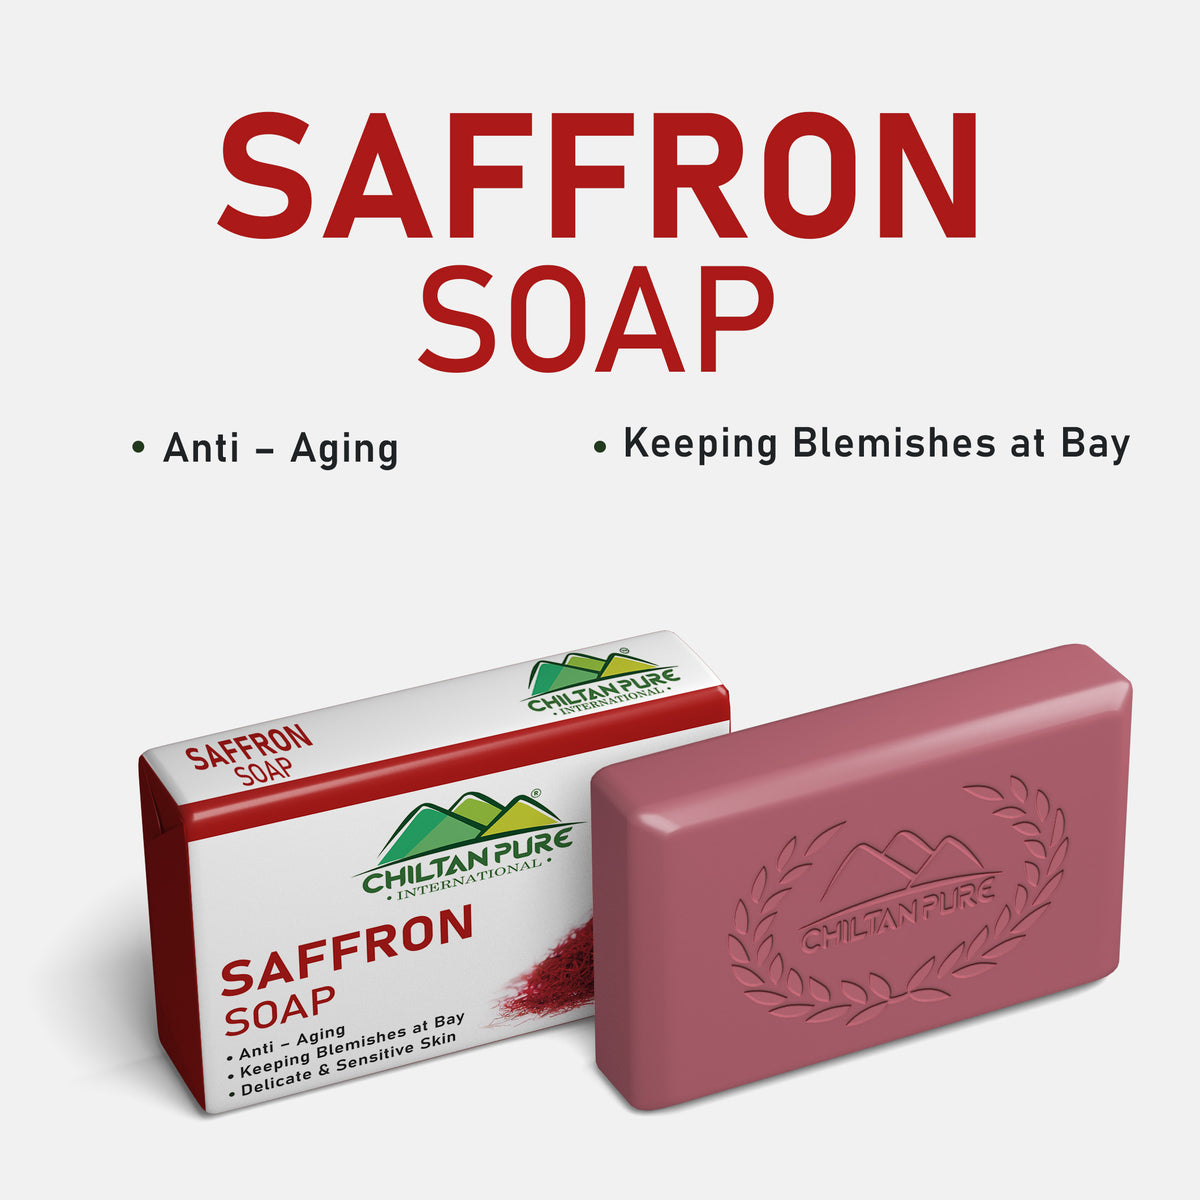 Saffron Soap - Anti-aging,& Keeping Blemishes at Bay